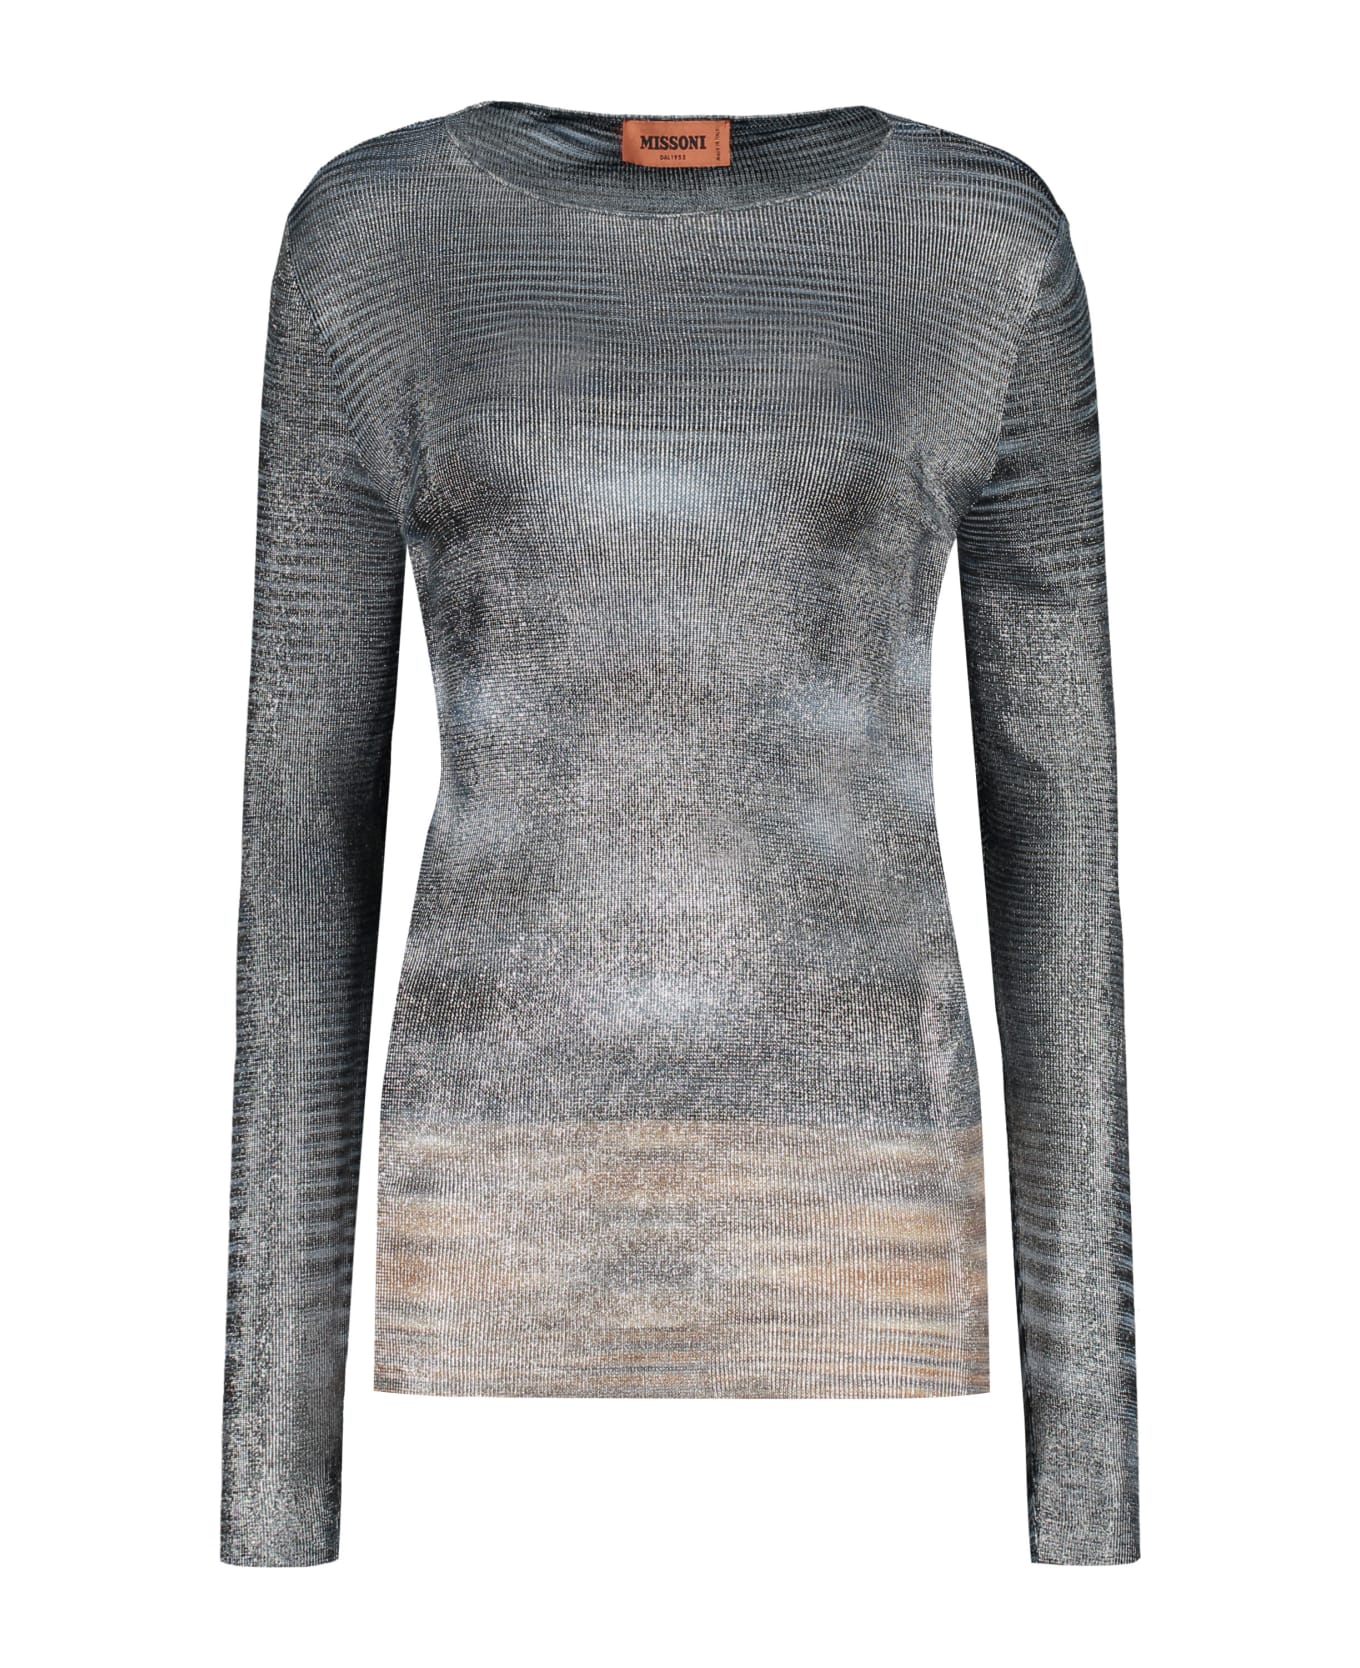 Missoni Knitted Viscosa-blend Top - blue